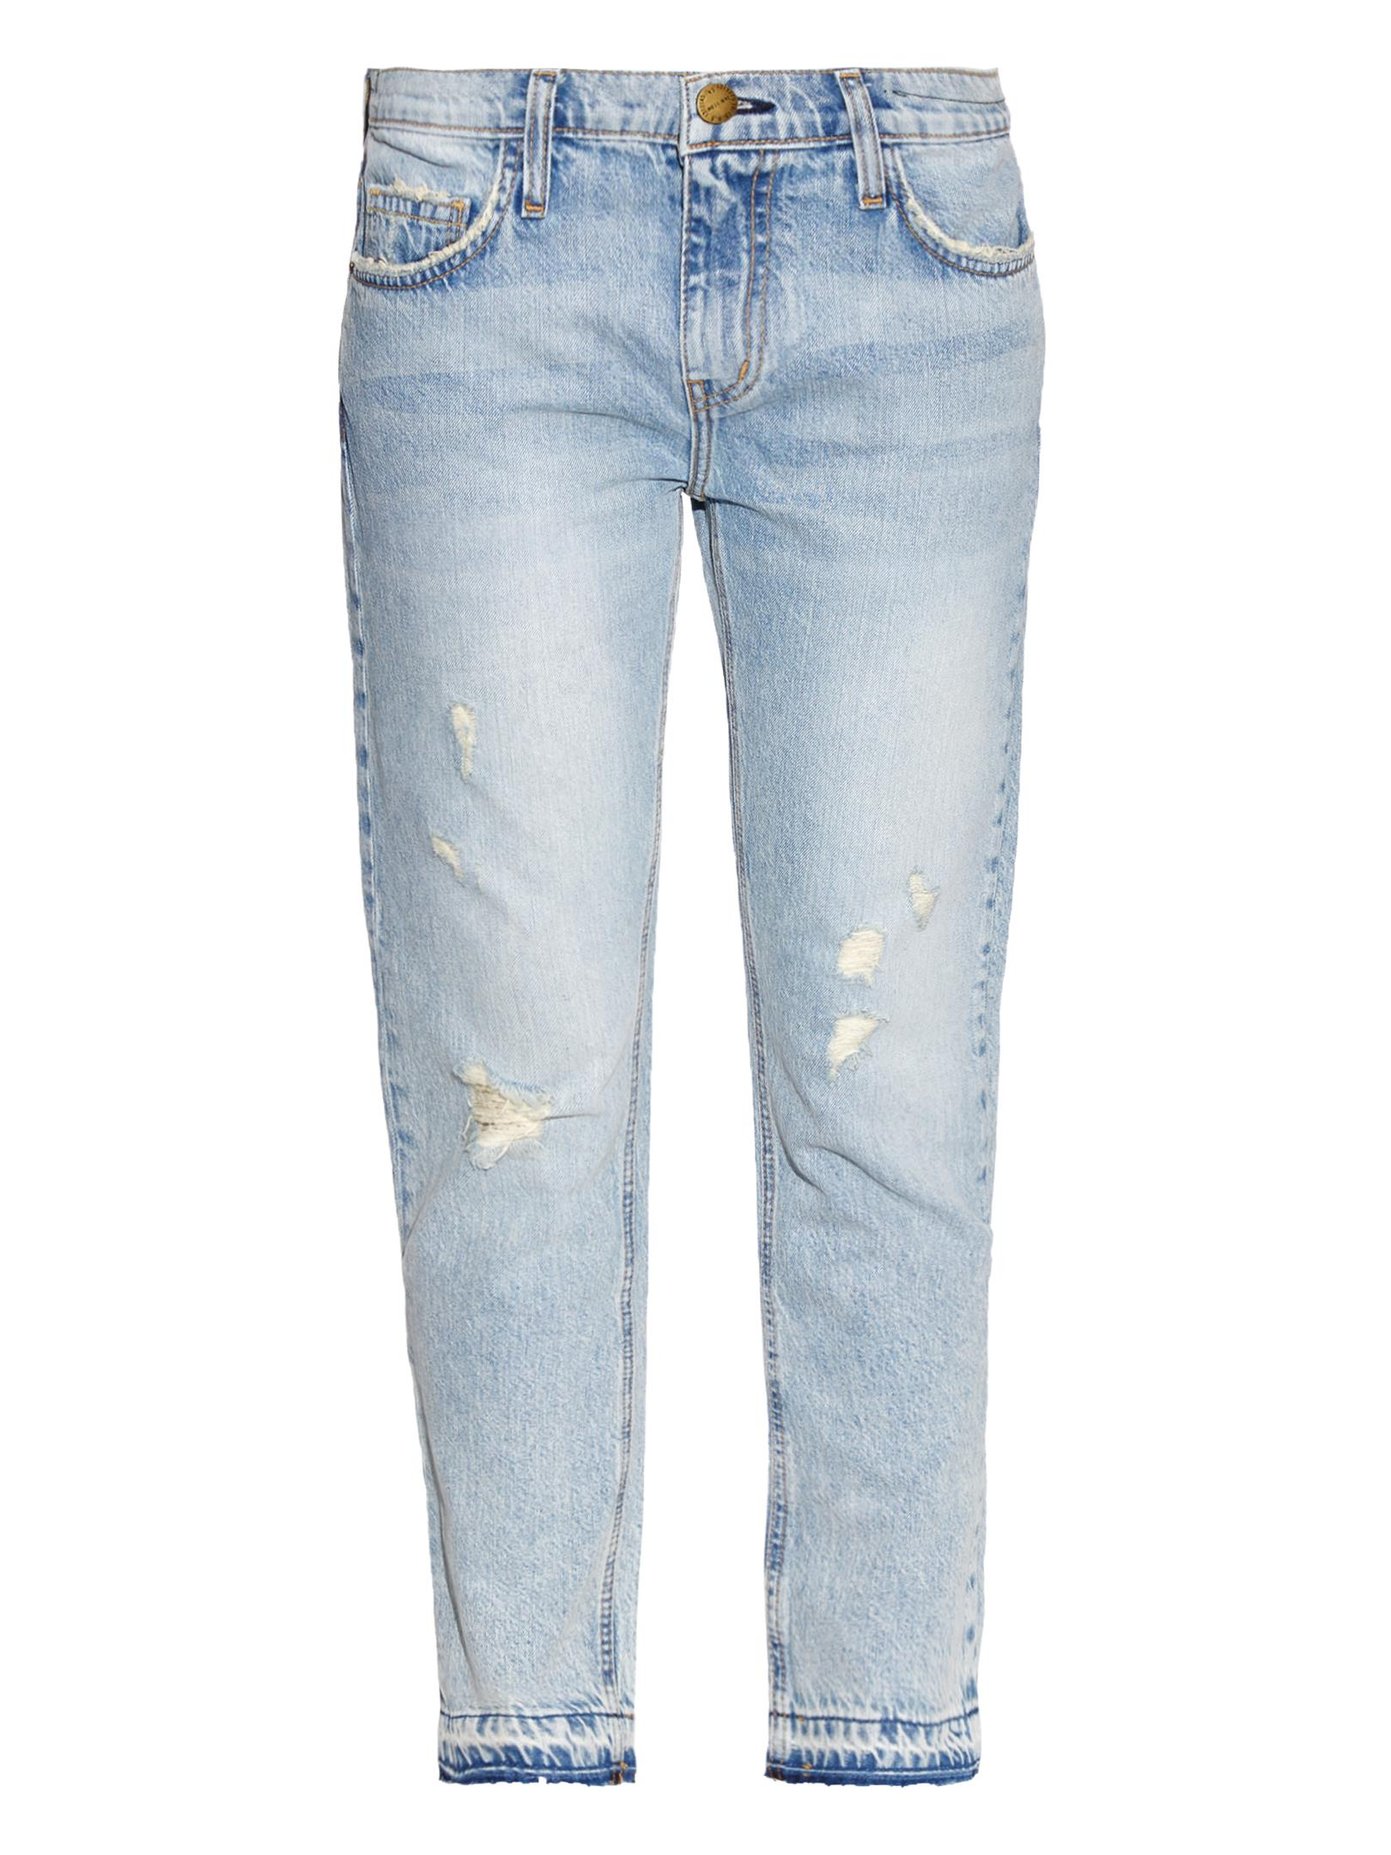 low rise jeans uk